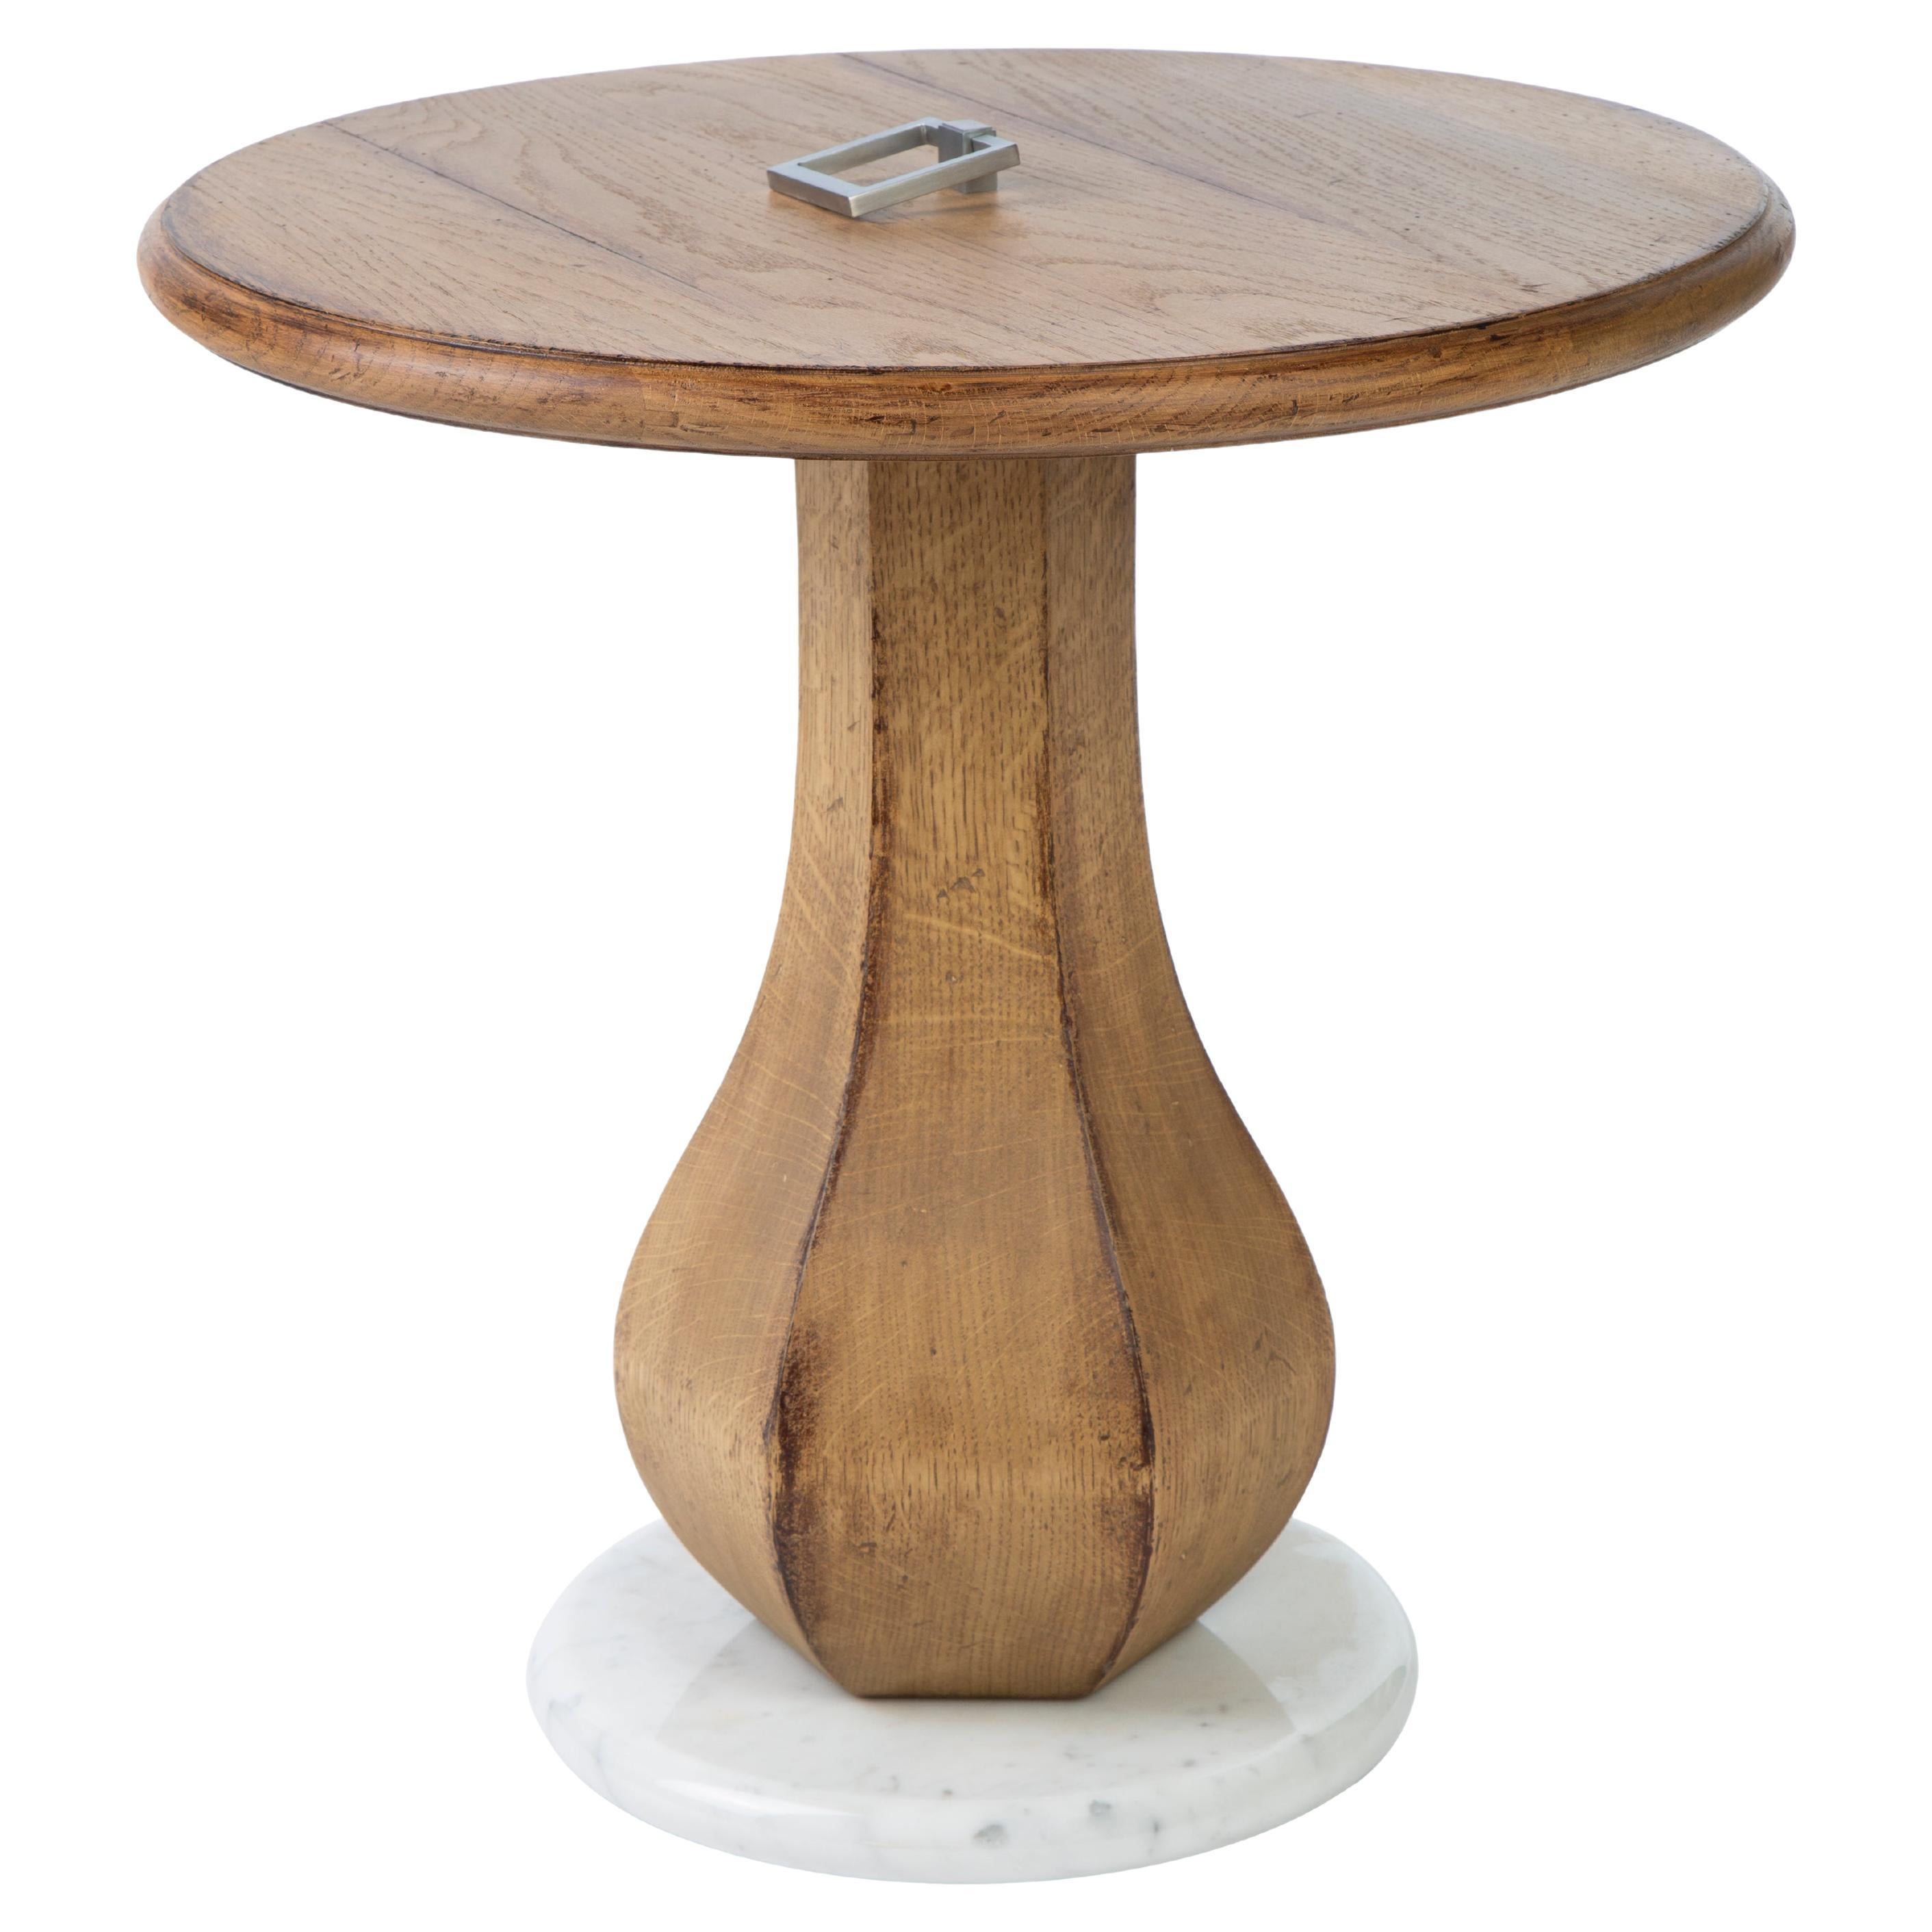 Moissonnier occasionnal table, model Pagode by Pierre Gonalons For Sale